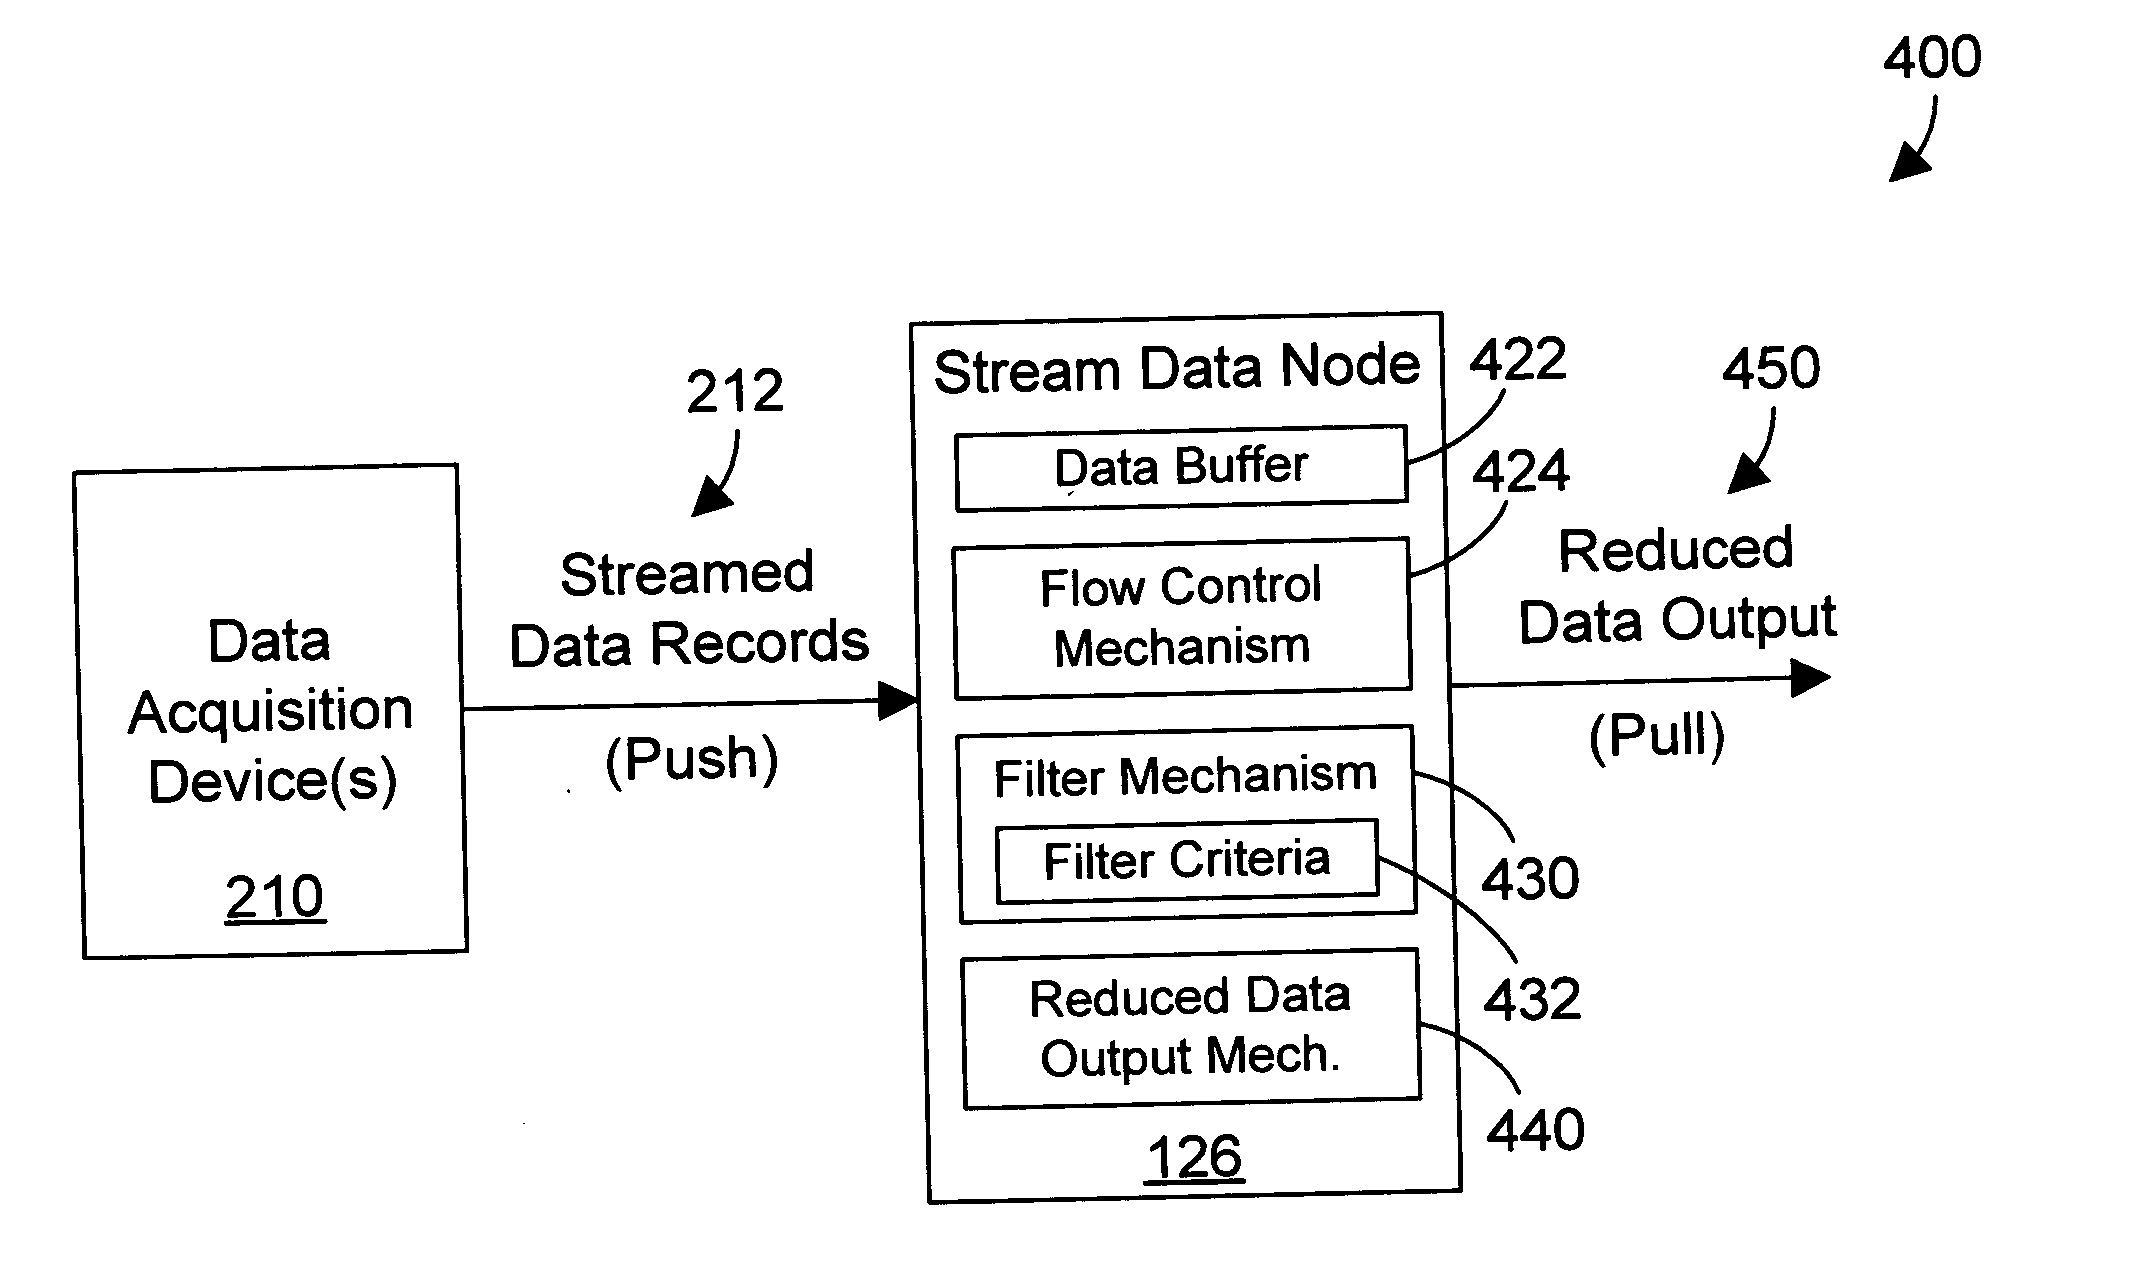 Apparatus and method for real-time mining and reduction of streamed data